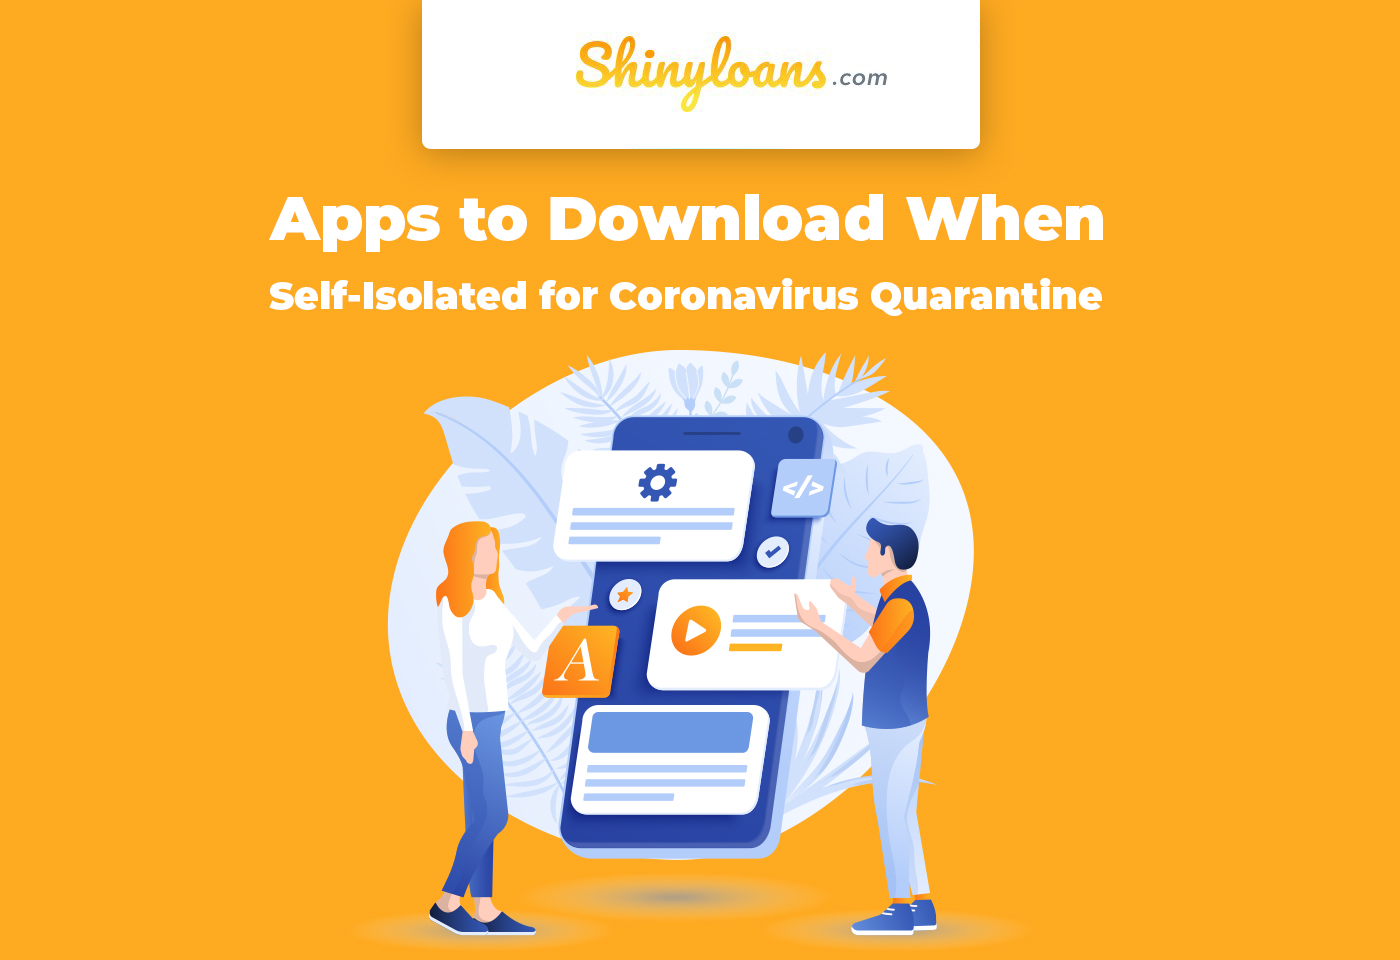 Apps to Download When Self-Isolated for Coronavirus Quarantine